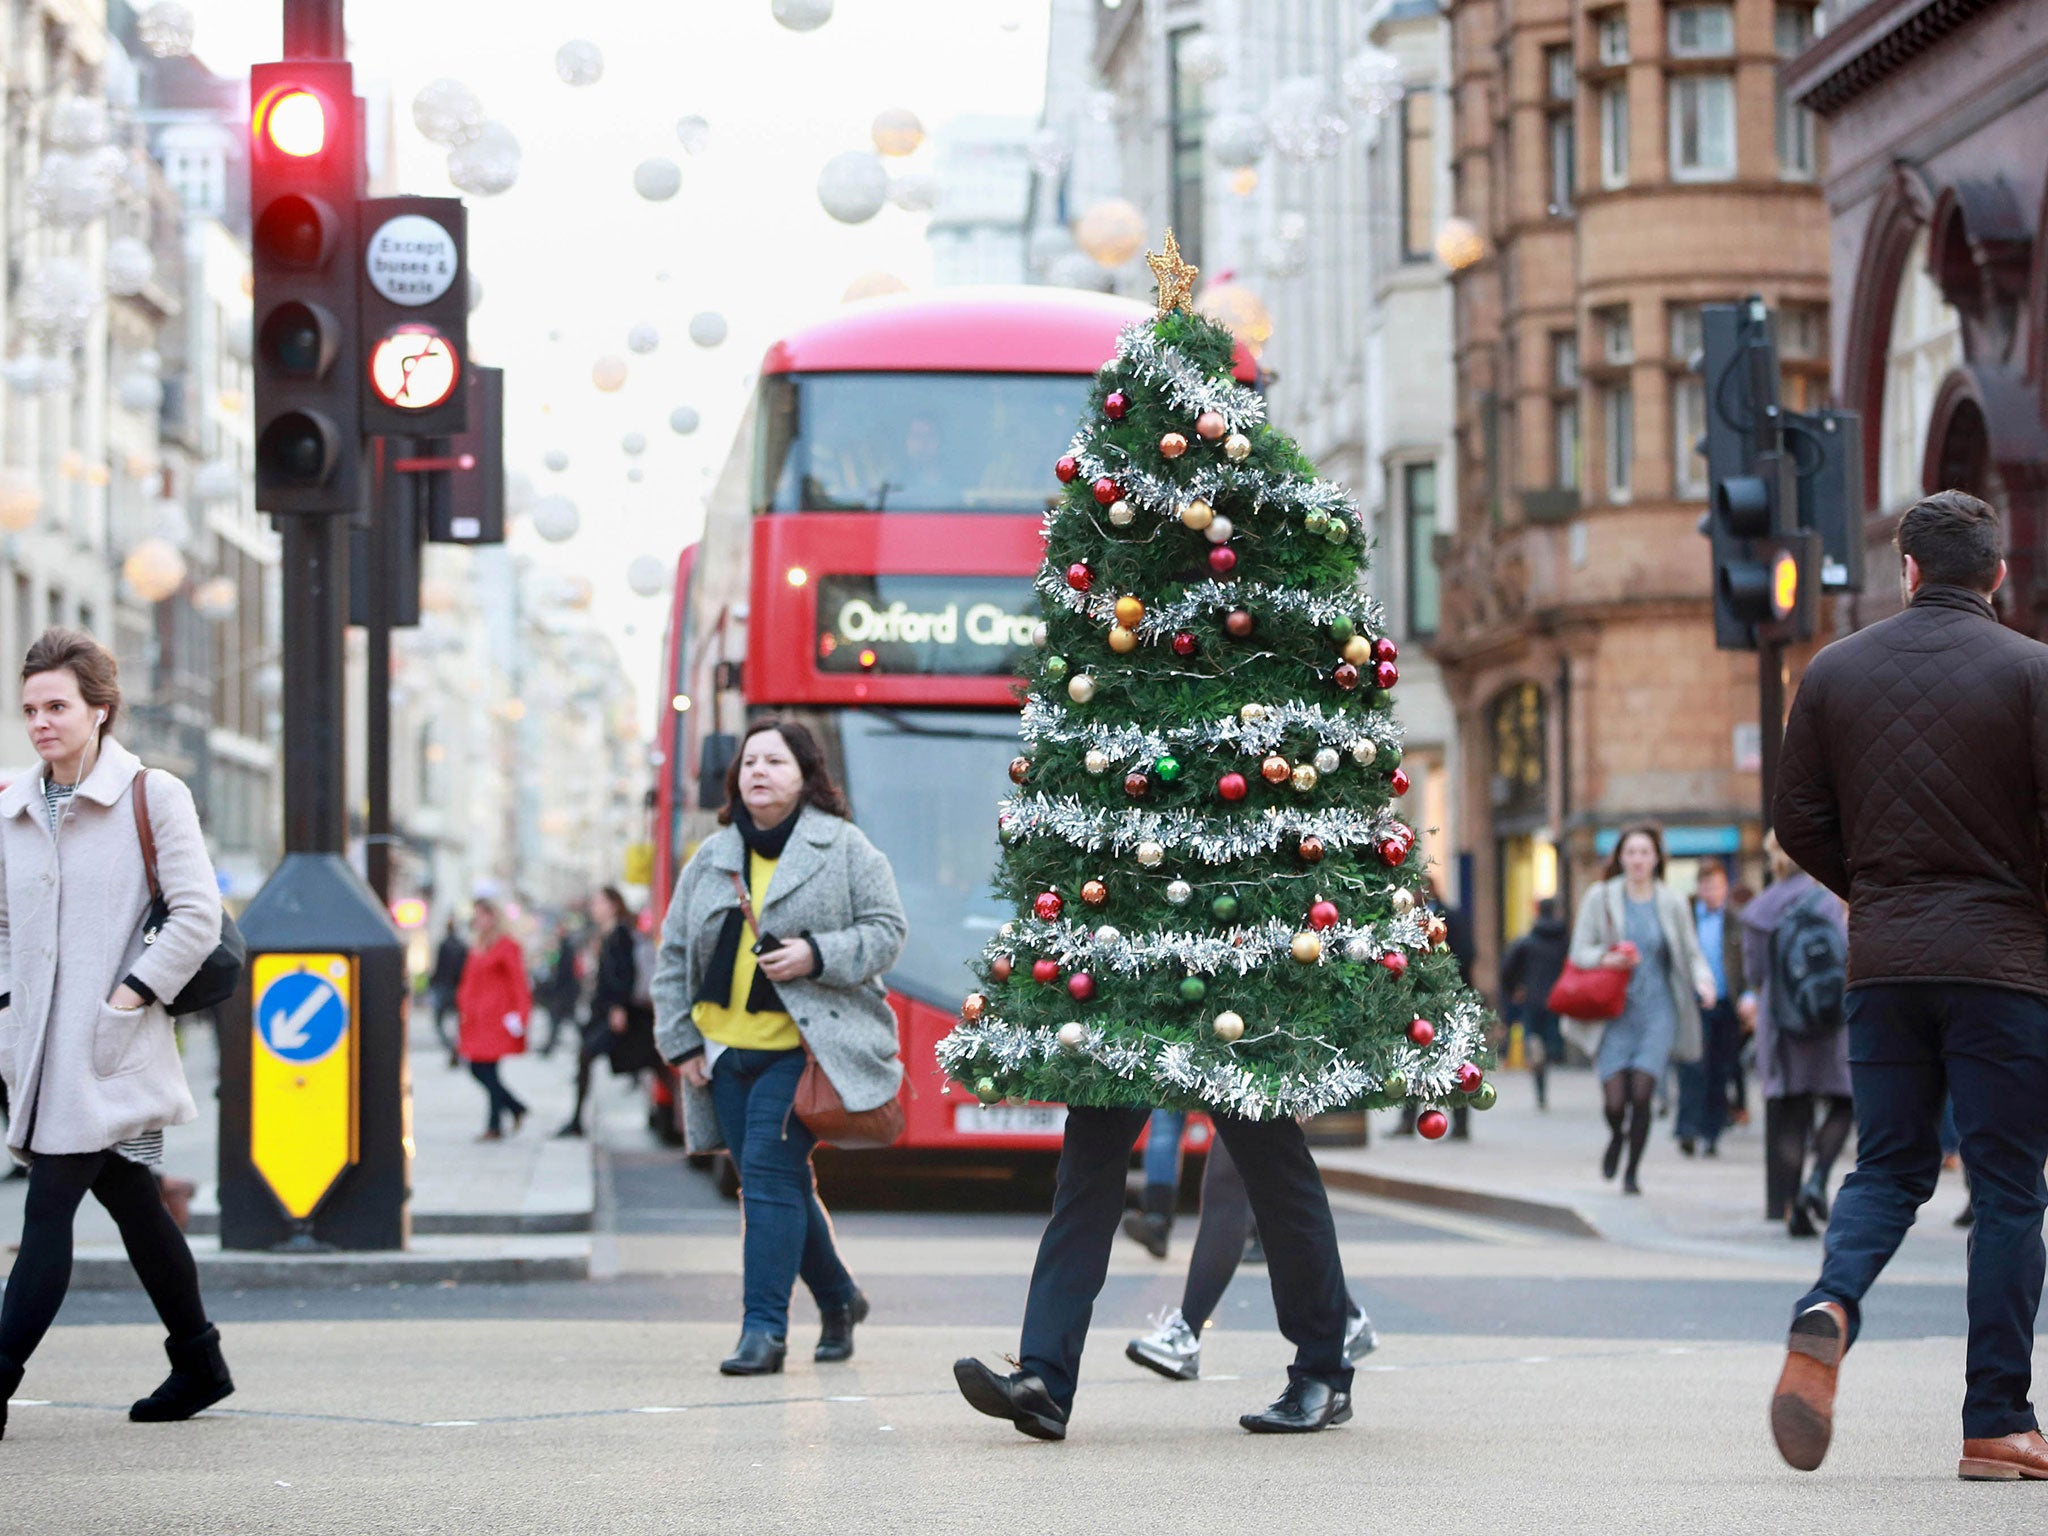 Heading home for Christmas is the perfect excuse to forget the stresses of city and uni life for many students